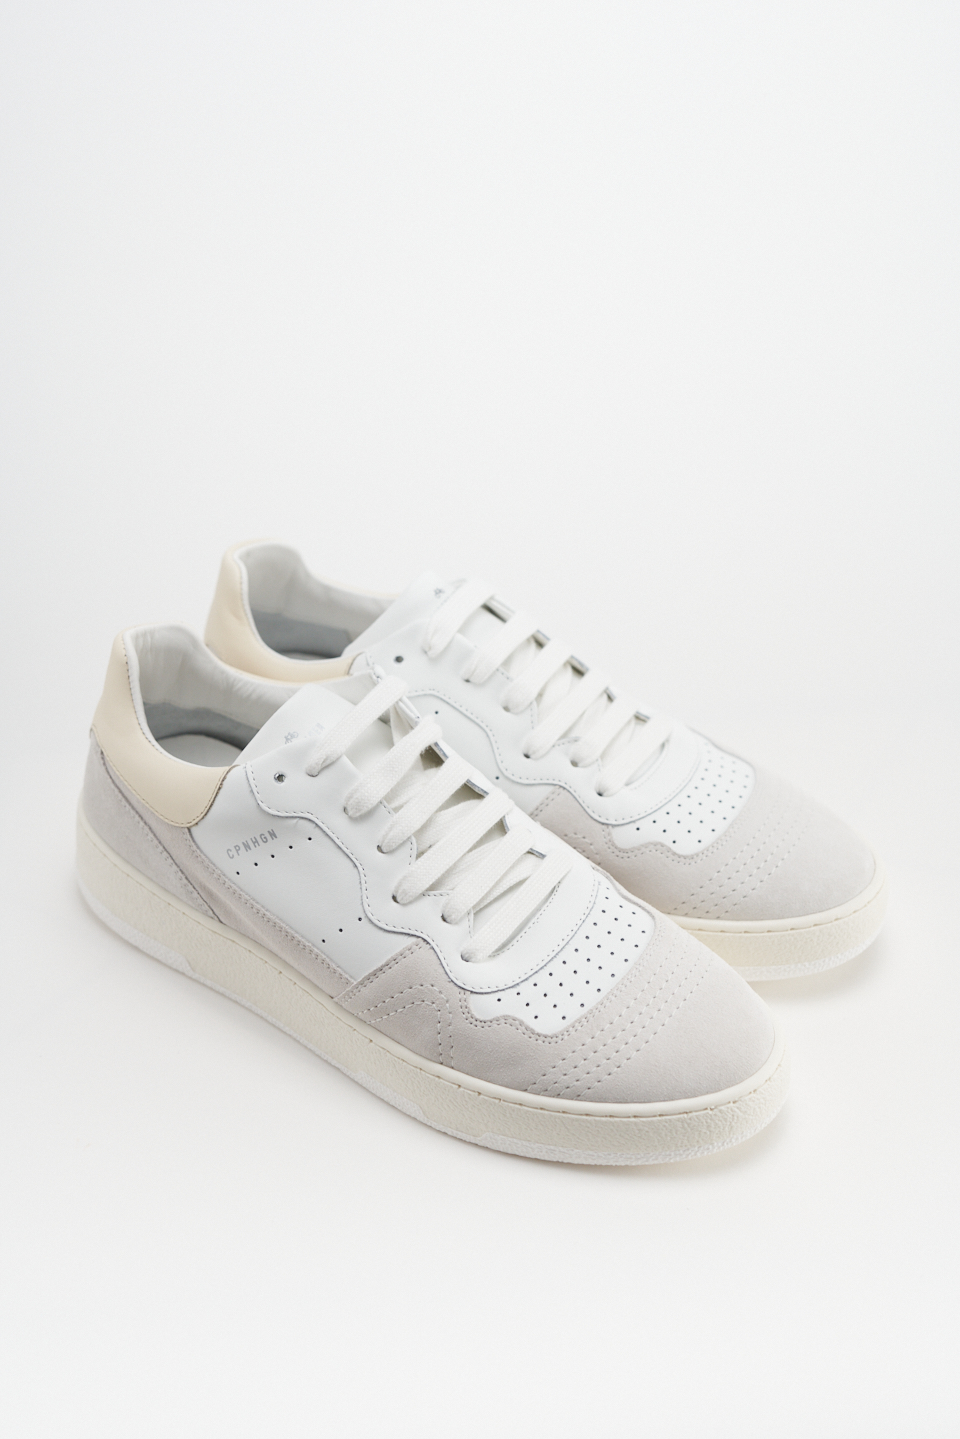 CPH461M leather mix white/butter